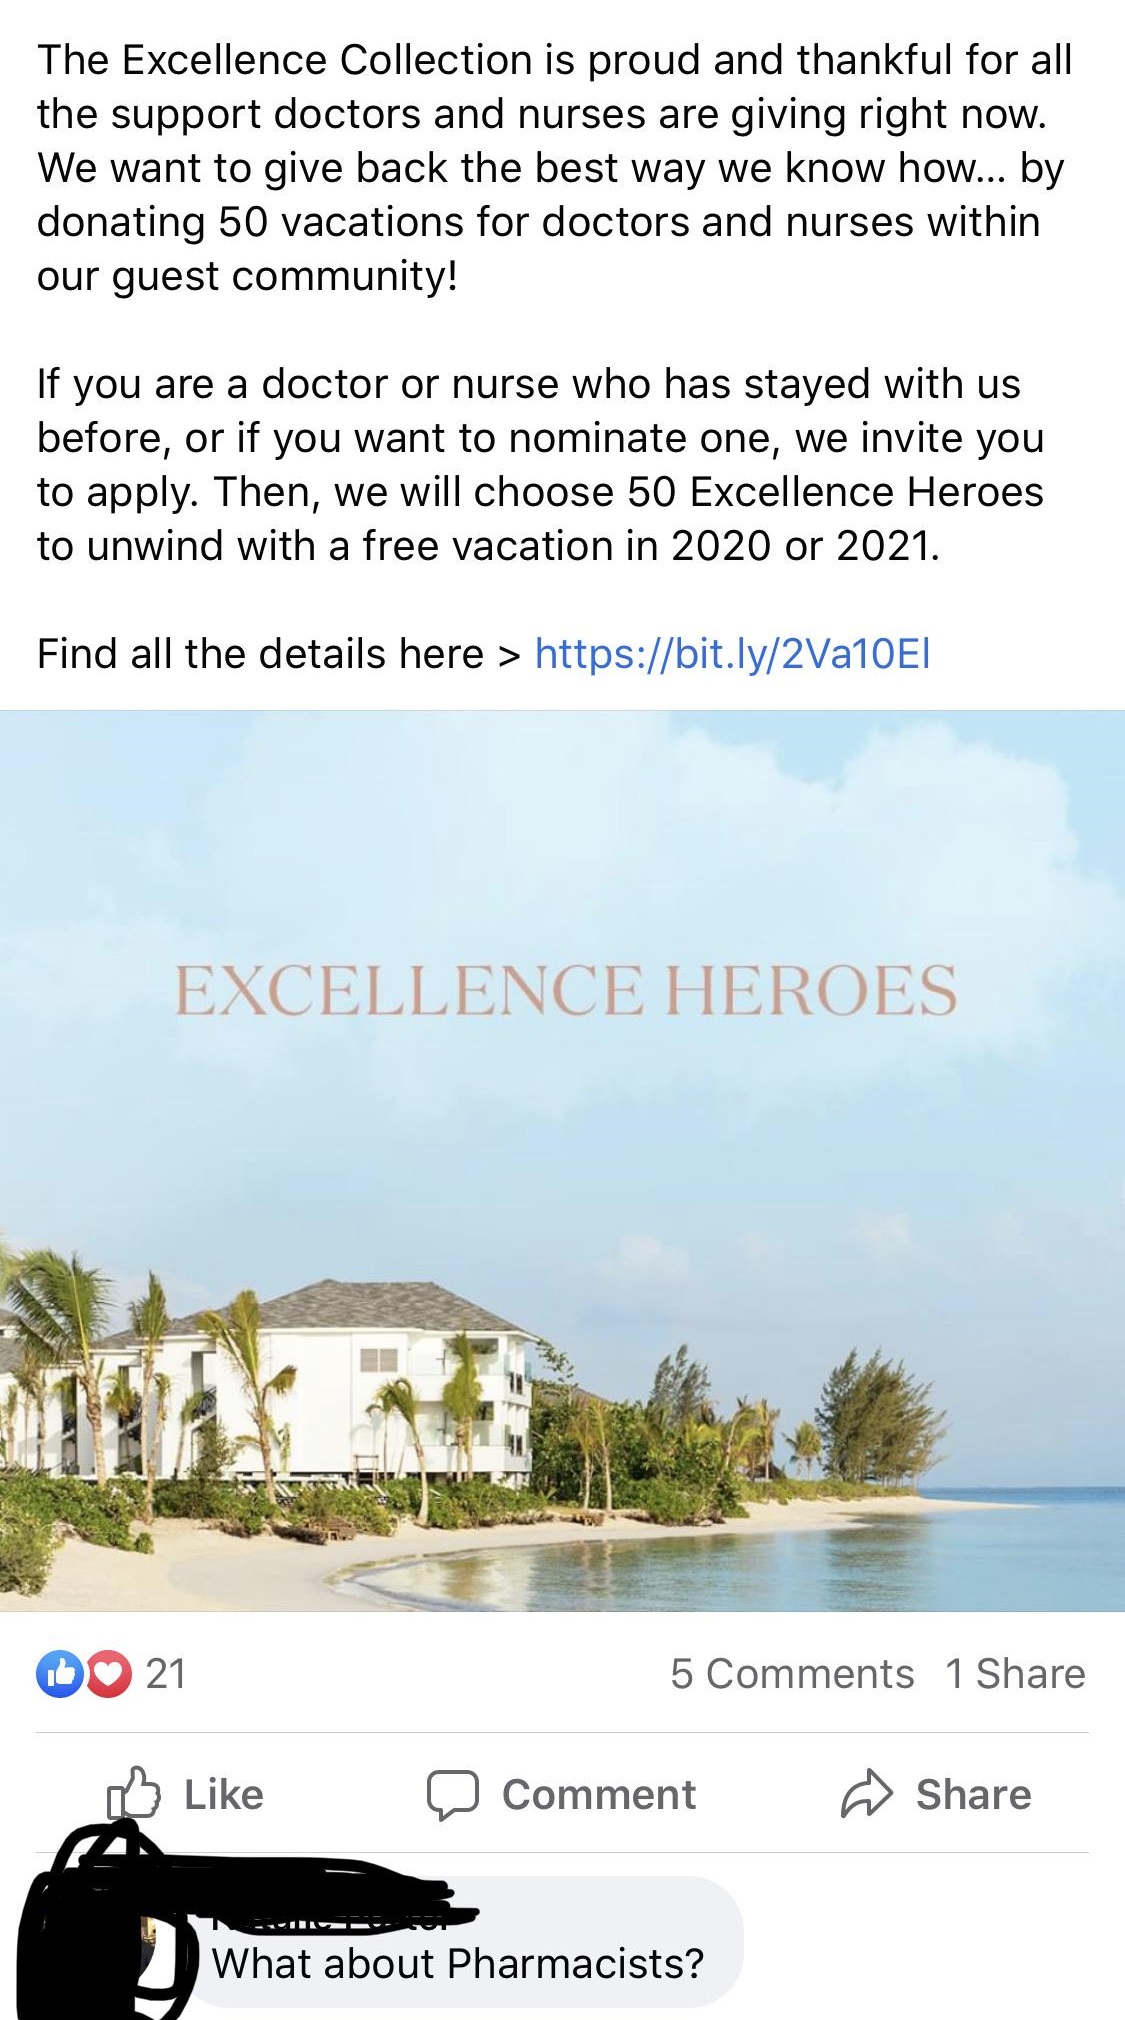 water resources - The Excellence Collection is proud and thankful for all the support doctors and nurses are giving right now. We want to give back the best way we know how... by donating 50 vacations for doctors and nurses within our guest community! If 